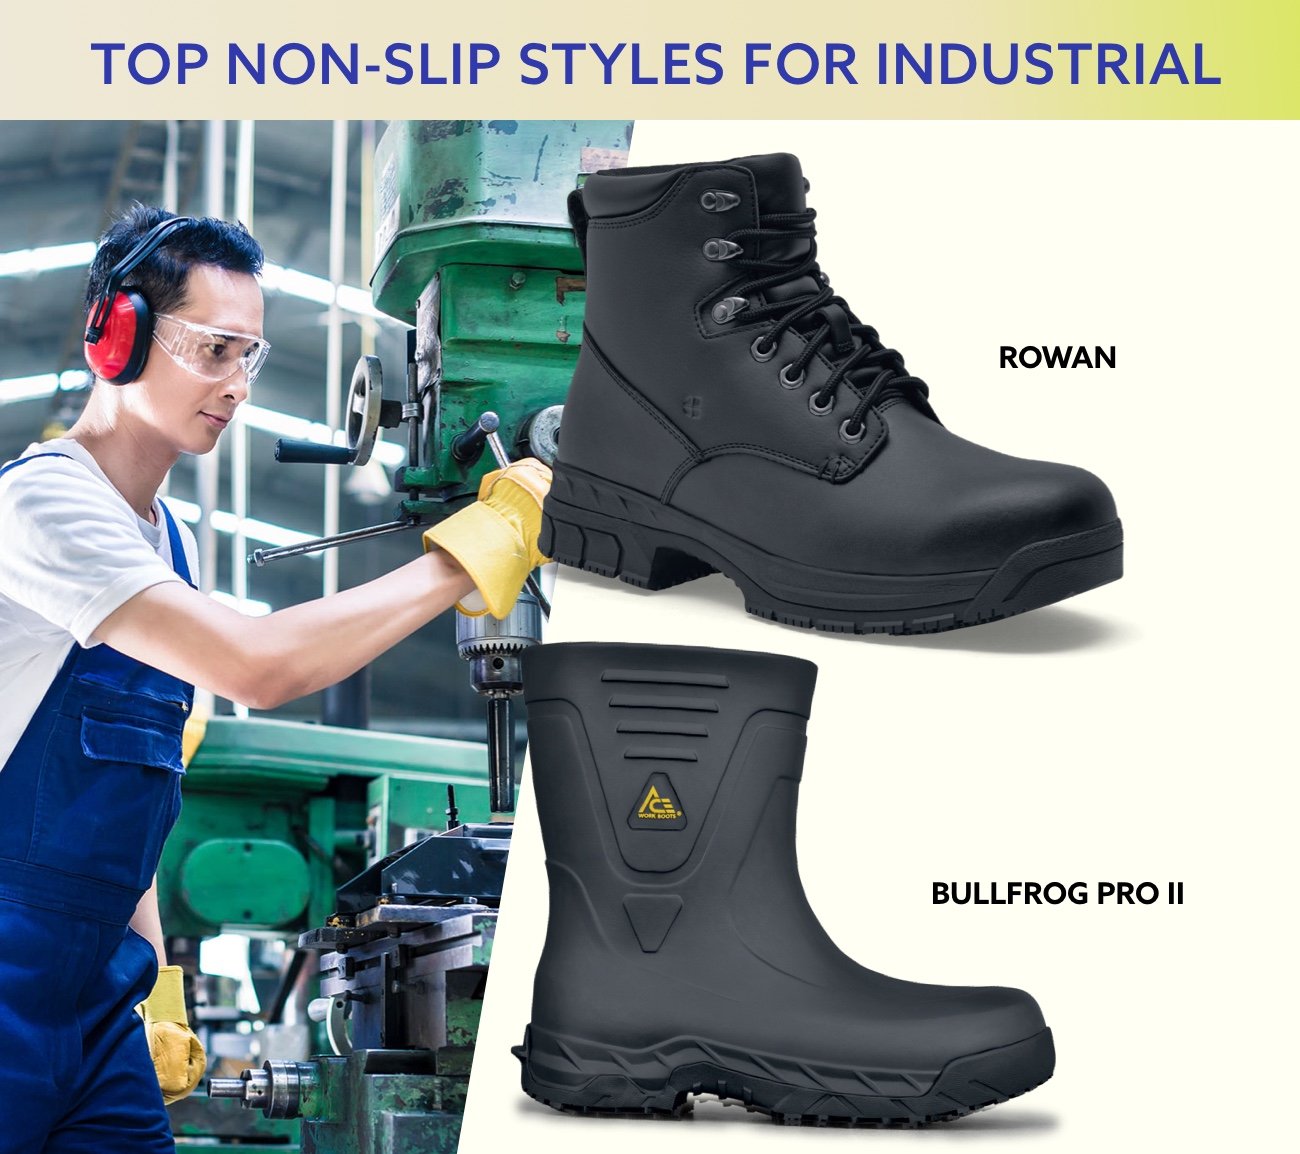 Shop Slip-Resistant Styles for Industrial.